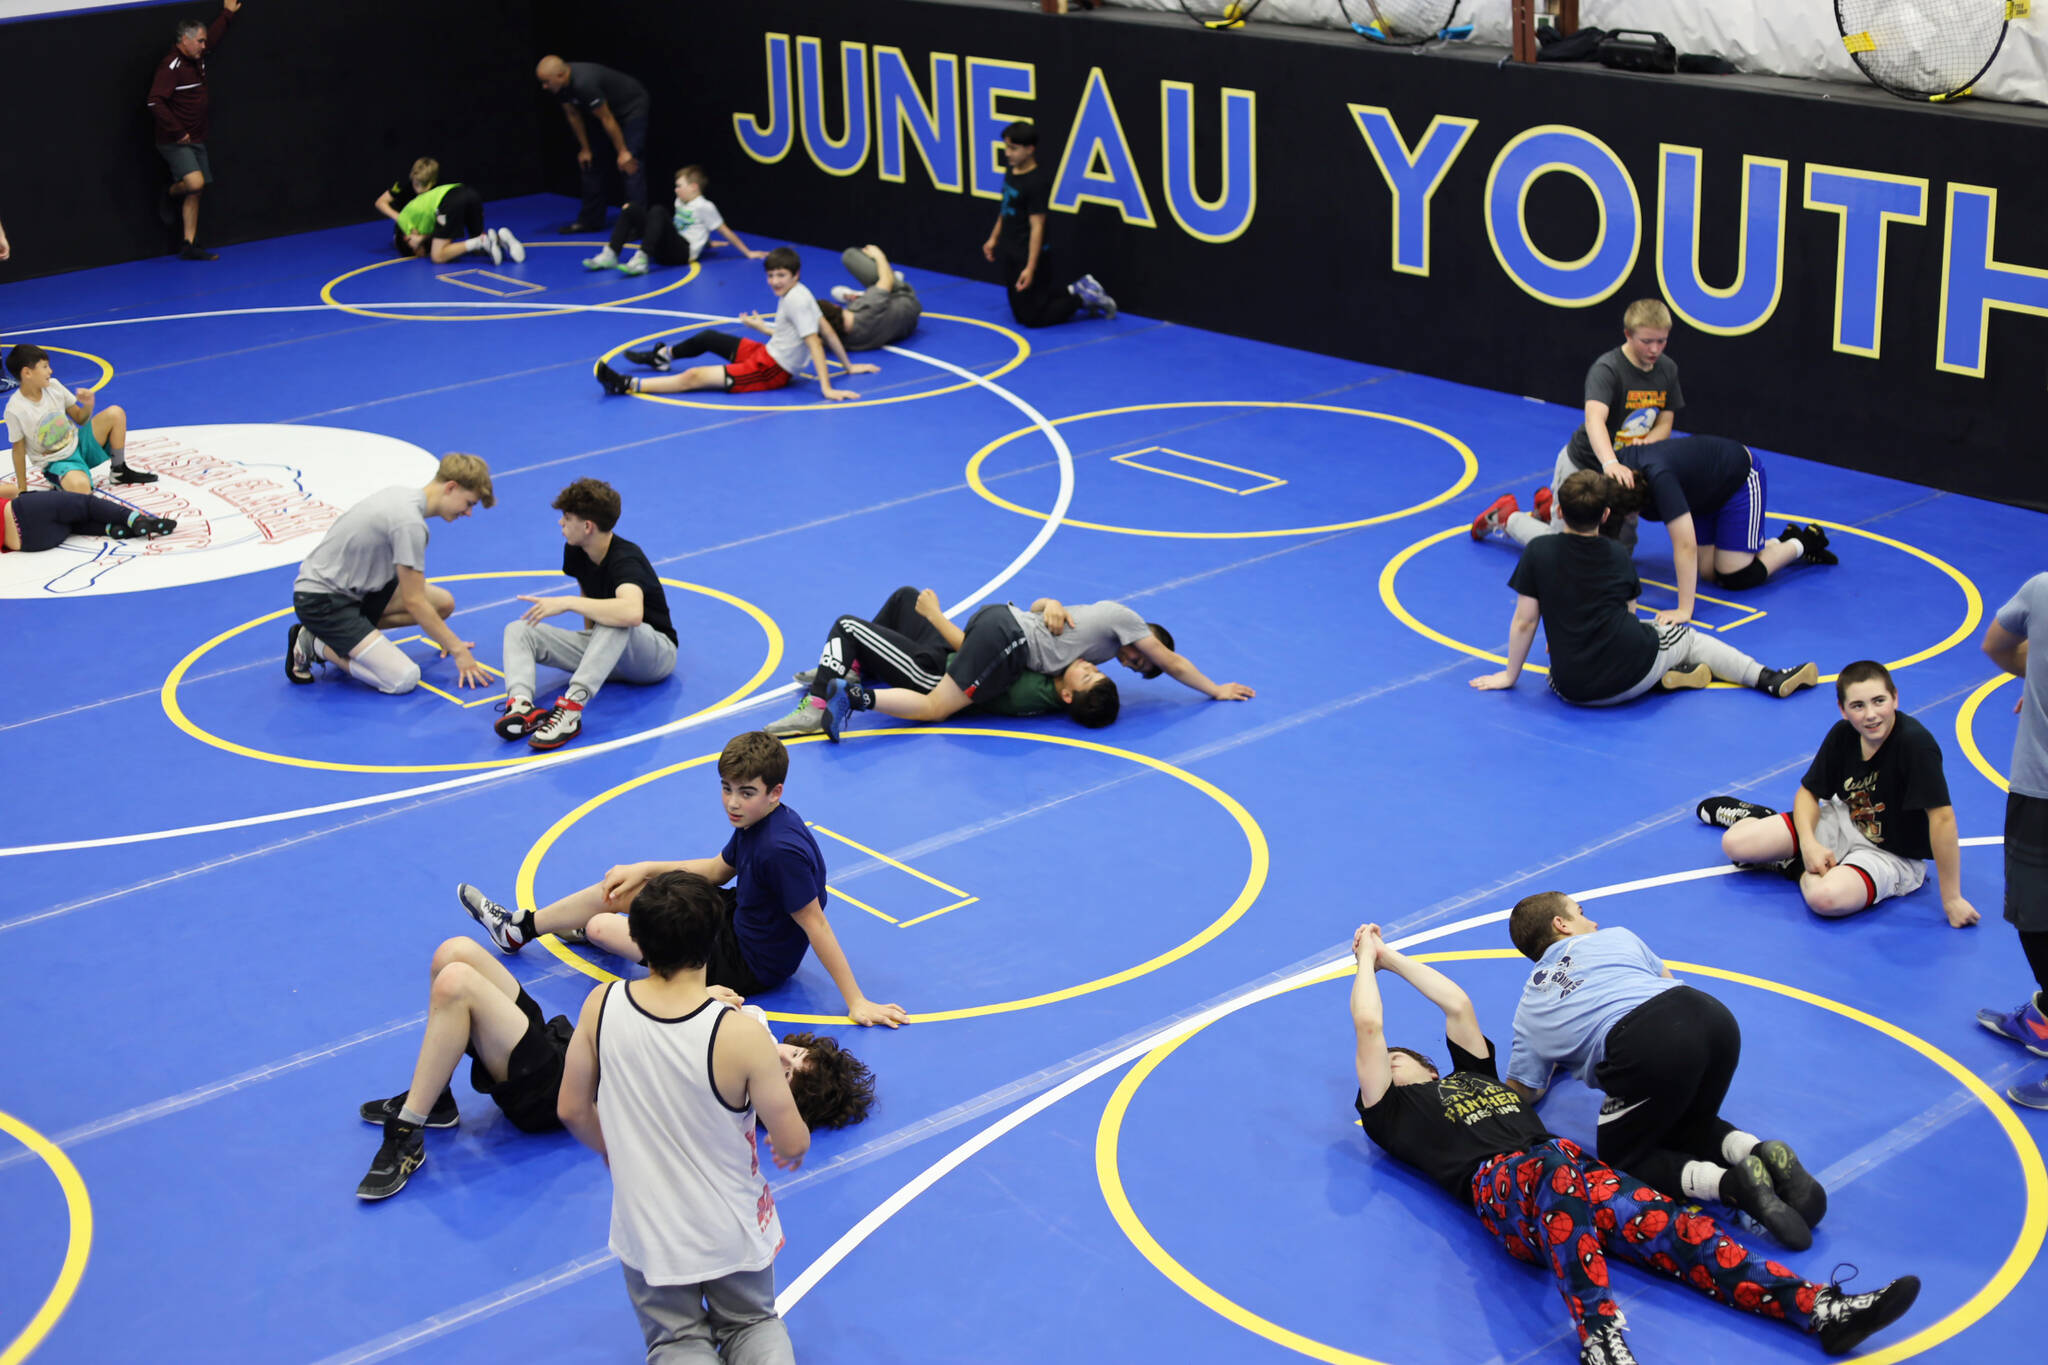 Athletes practice new moves while wrestling during a Labor Day weekend clinic at the Juneau Youth Wrestling Club’s new building on Monday. (Clarise Larson / Juneau Empire)